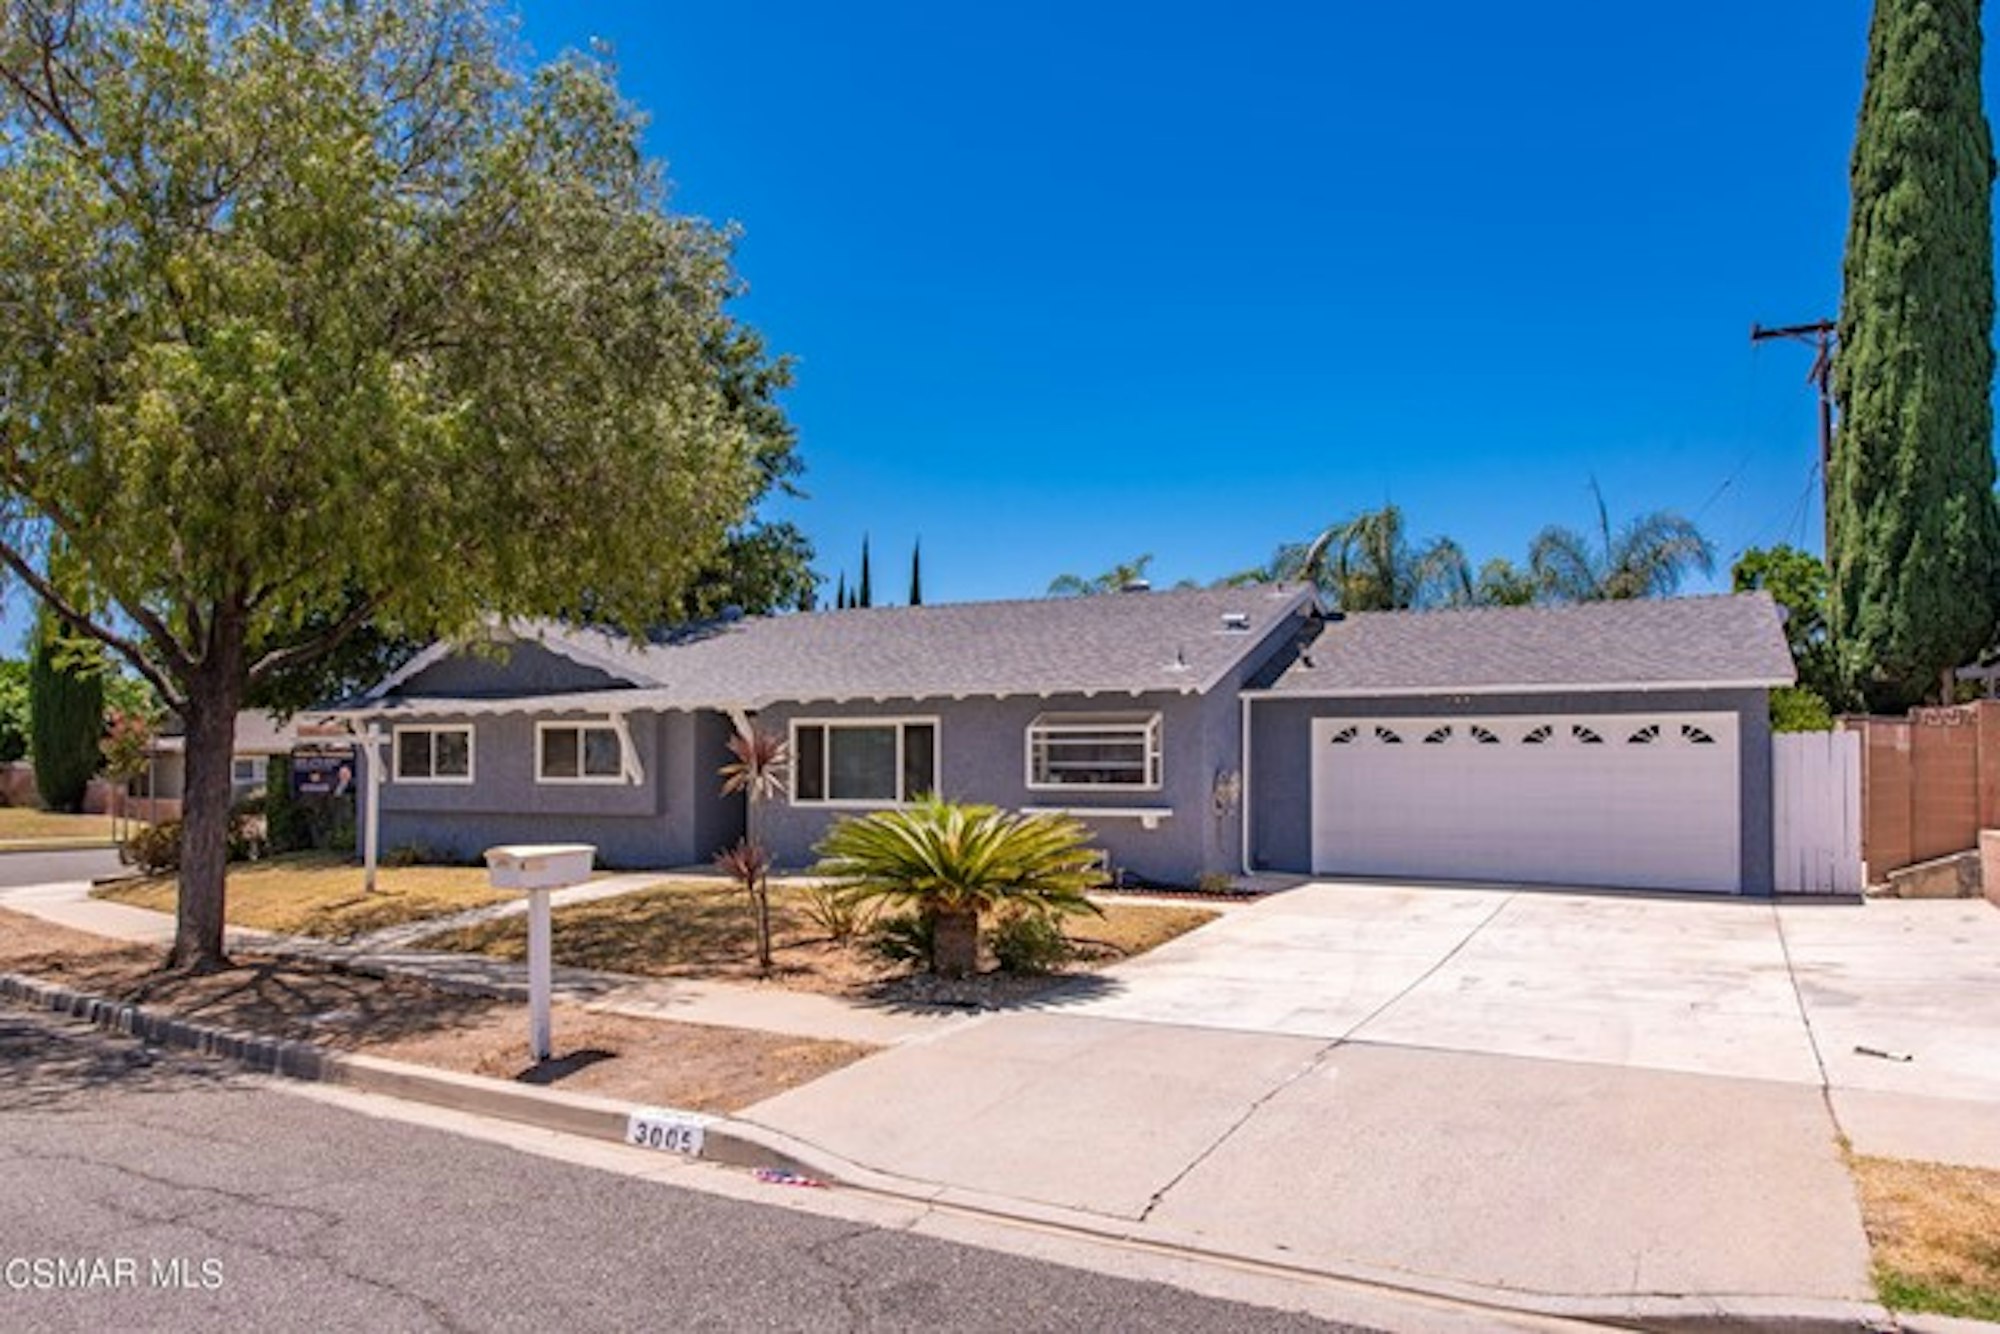 Photo 1 of 37 - 3005 Mineral Wells Ct, Simi Valley, CA 93063